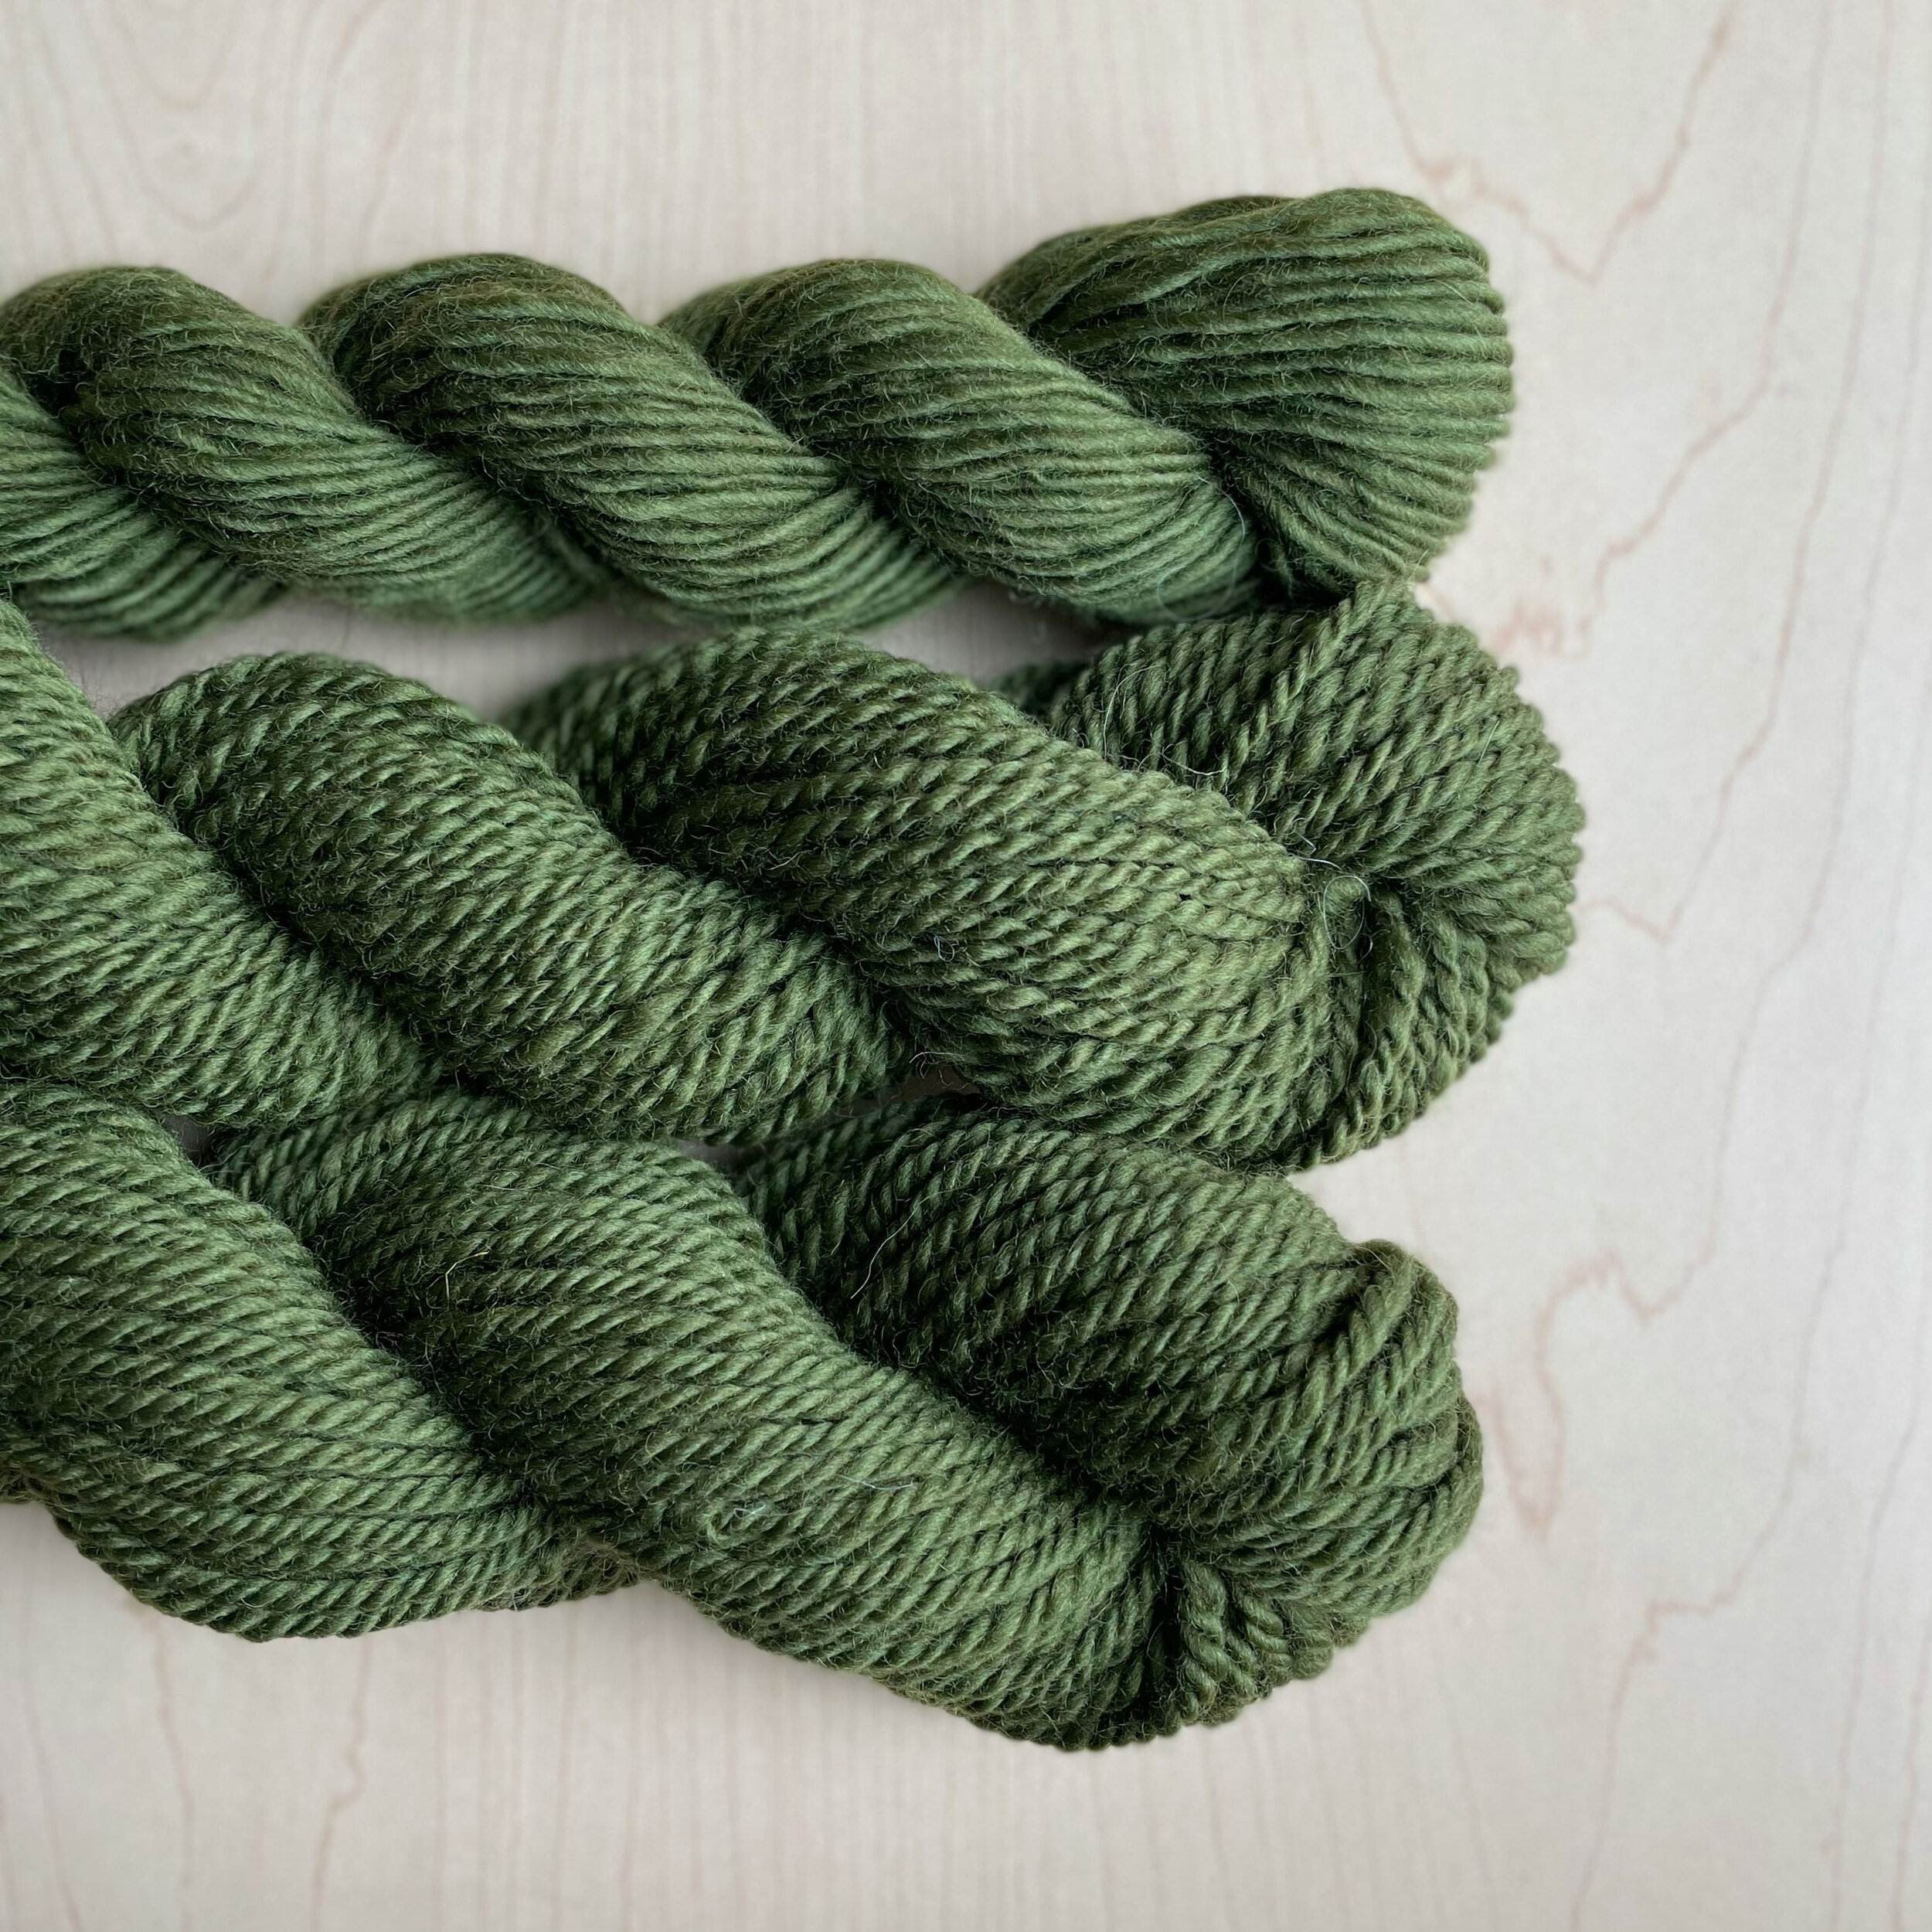 ashford handicrafts - Spinning Woolen and Worsted - by Jillian Moreno